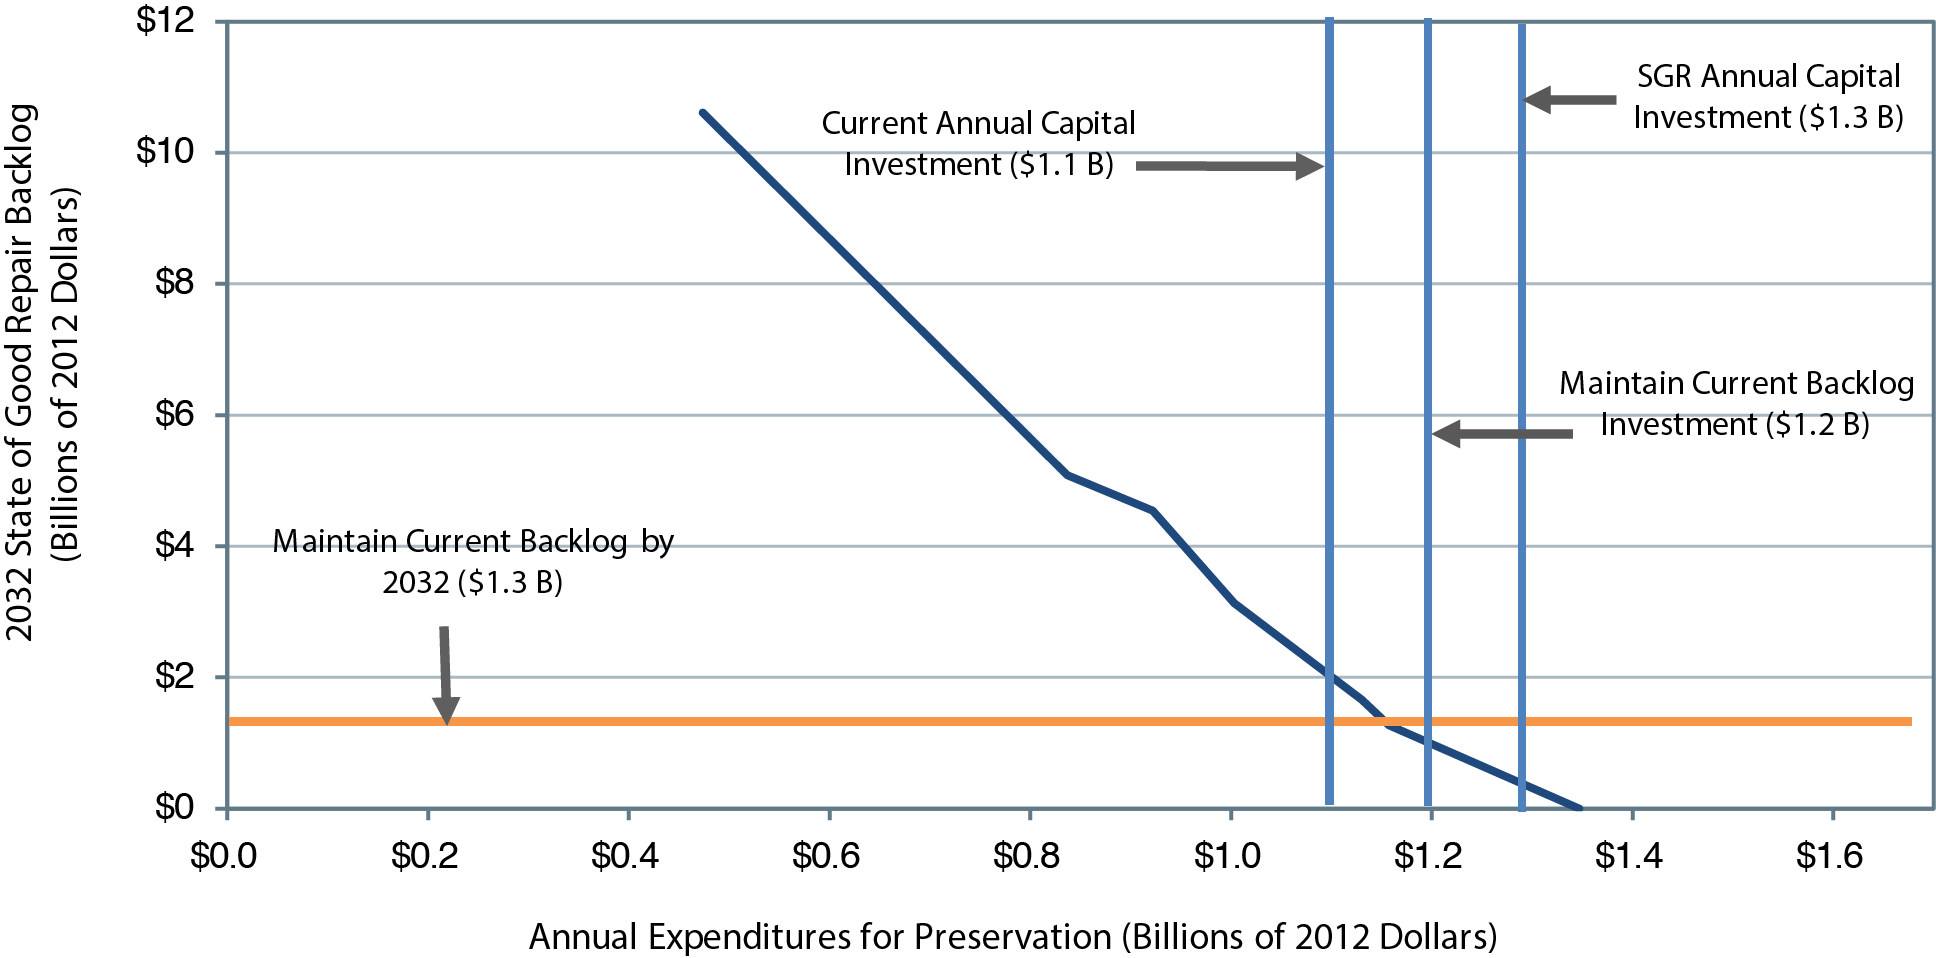 A line chart plots state of good repair backlog in billions of 2012 dollars over annual expenditures for preservation in billions of dollars. The backlog value is $10.6 billion at an annual expenditure of $0.5 billion. The plot trends steadily downward to backlog of $1.7 billion at an annual expenditure of $1.1 billion, decreases to $1.3 billion at an annual expenditure of $1.2 billion, then steadily decreases downward to zero at an annual expenditure of $1.3 billion. Source: Transit Economic Requirements Model.